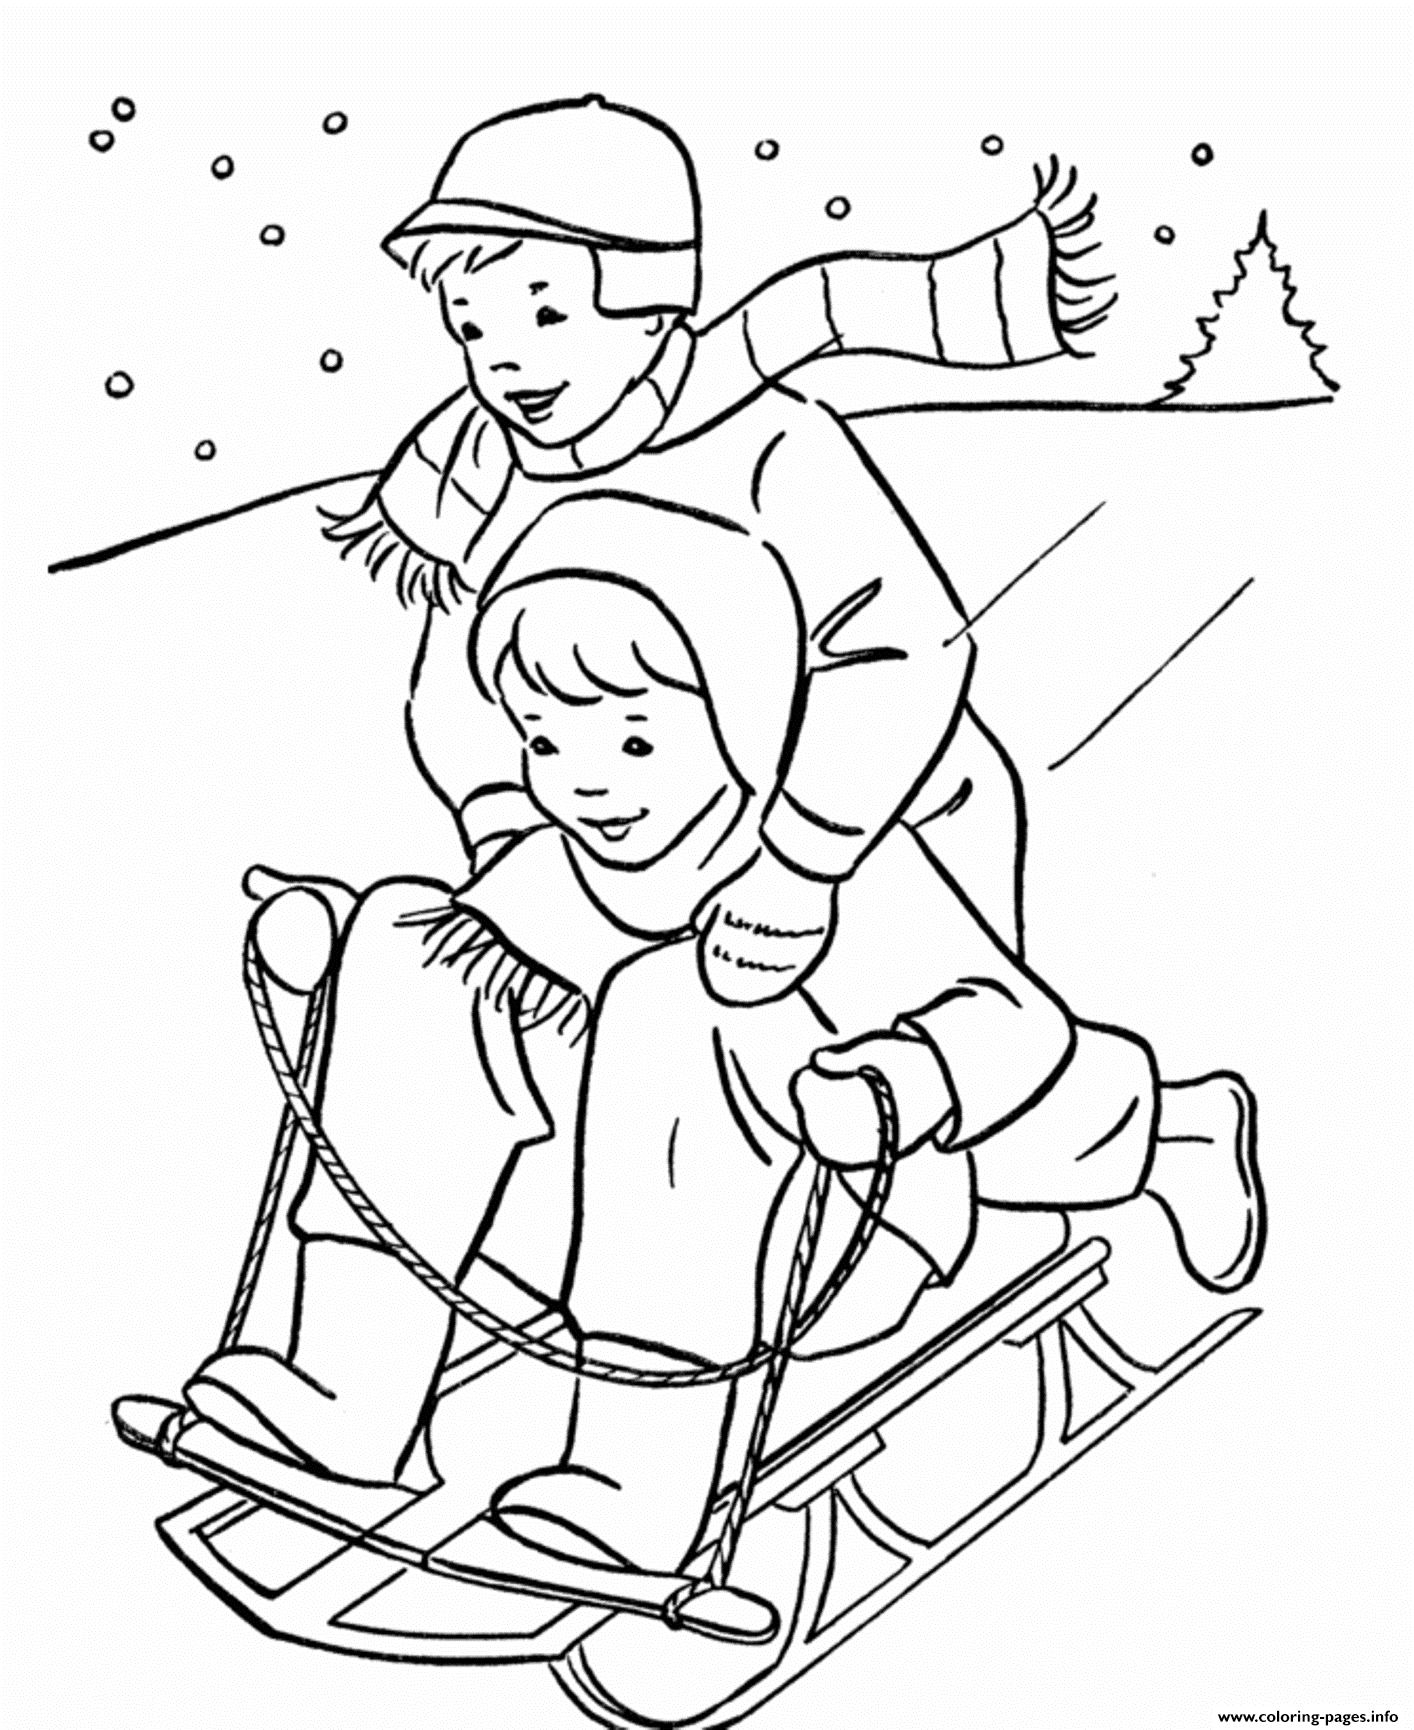 Kids Playing Sled In The Winter S6625 coloring